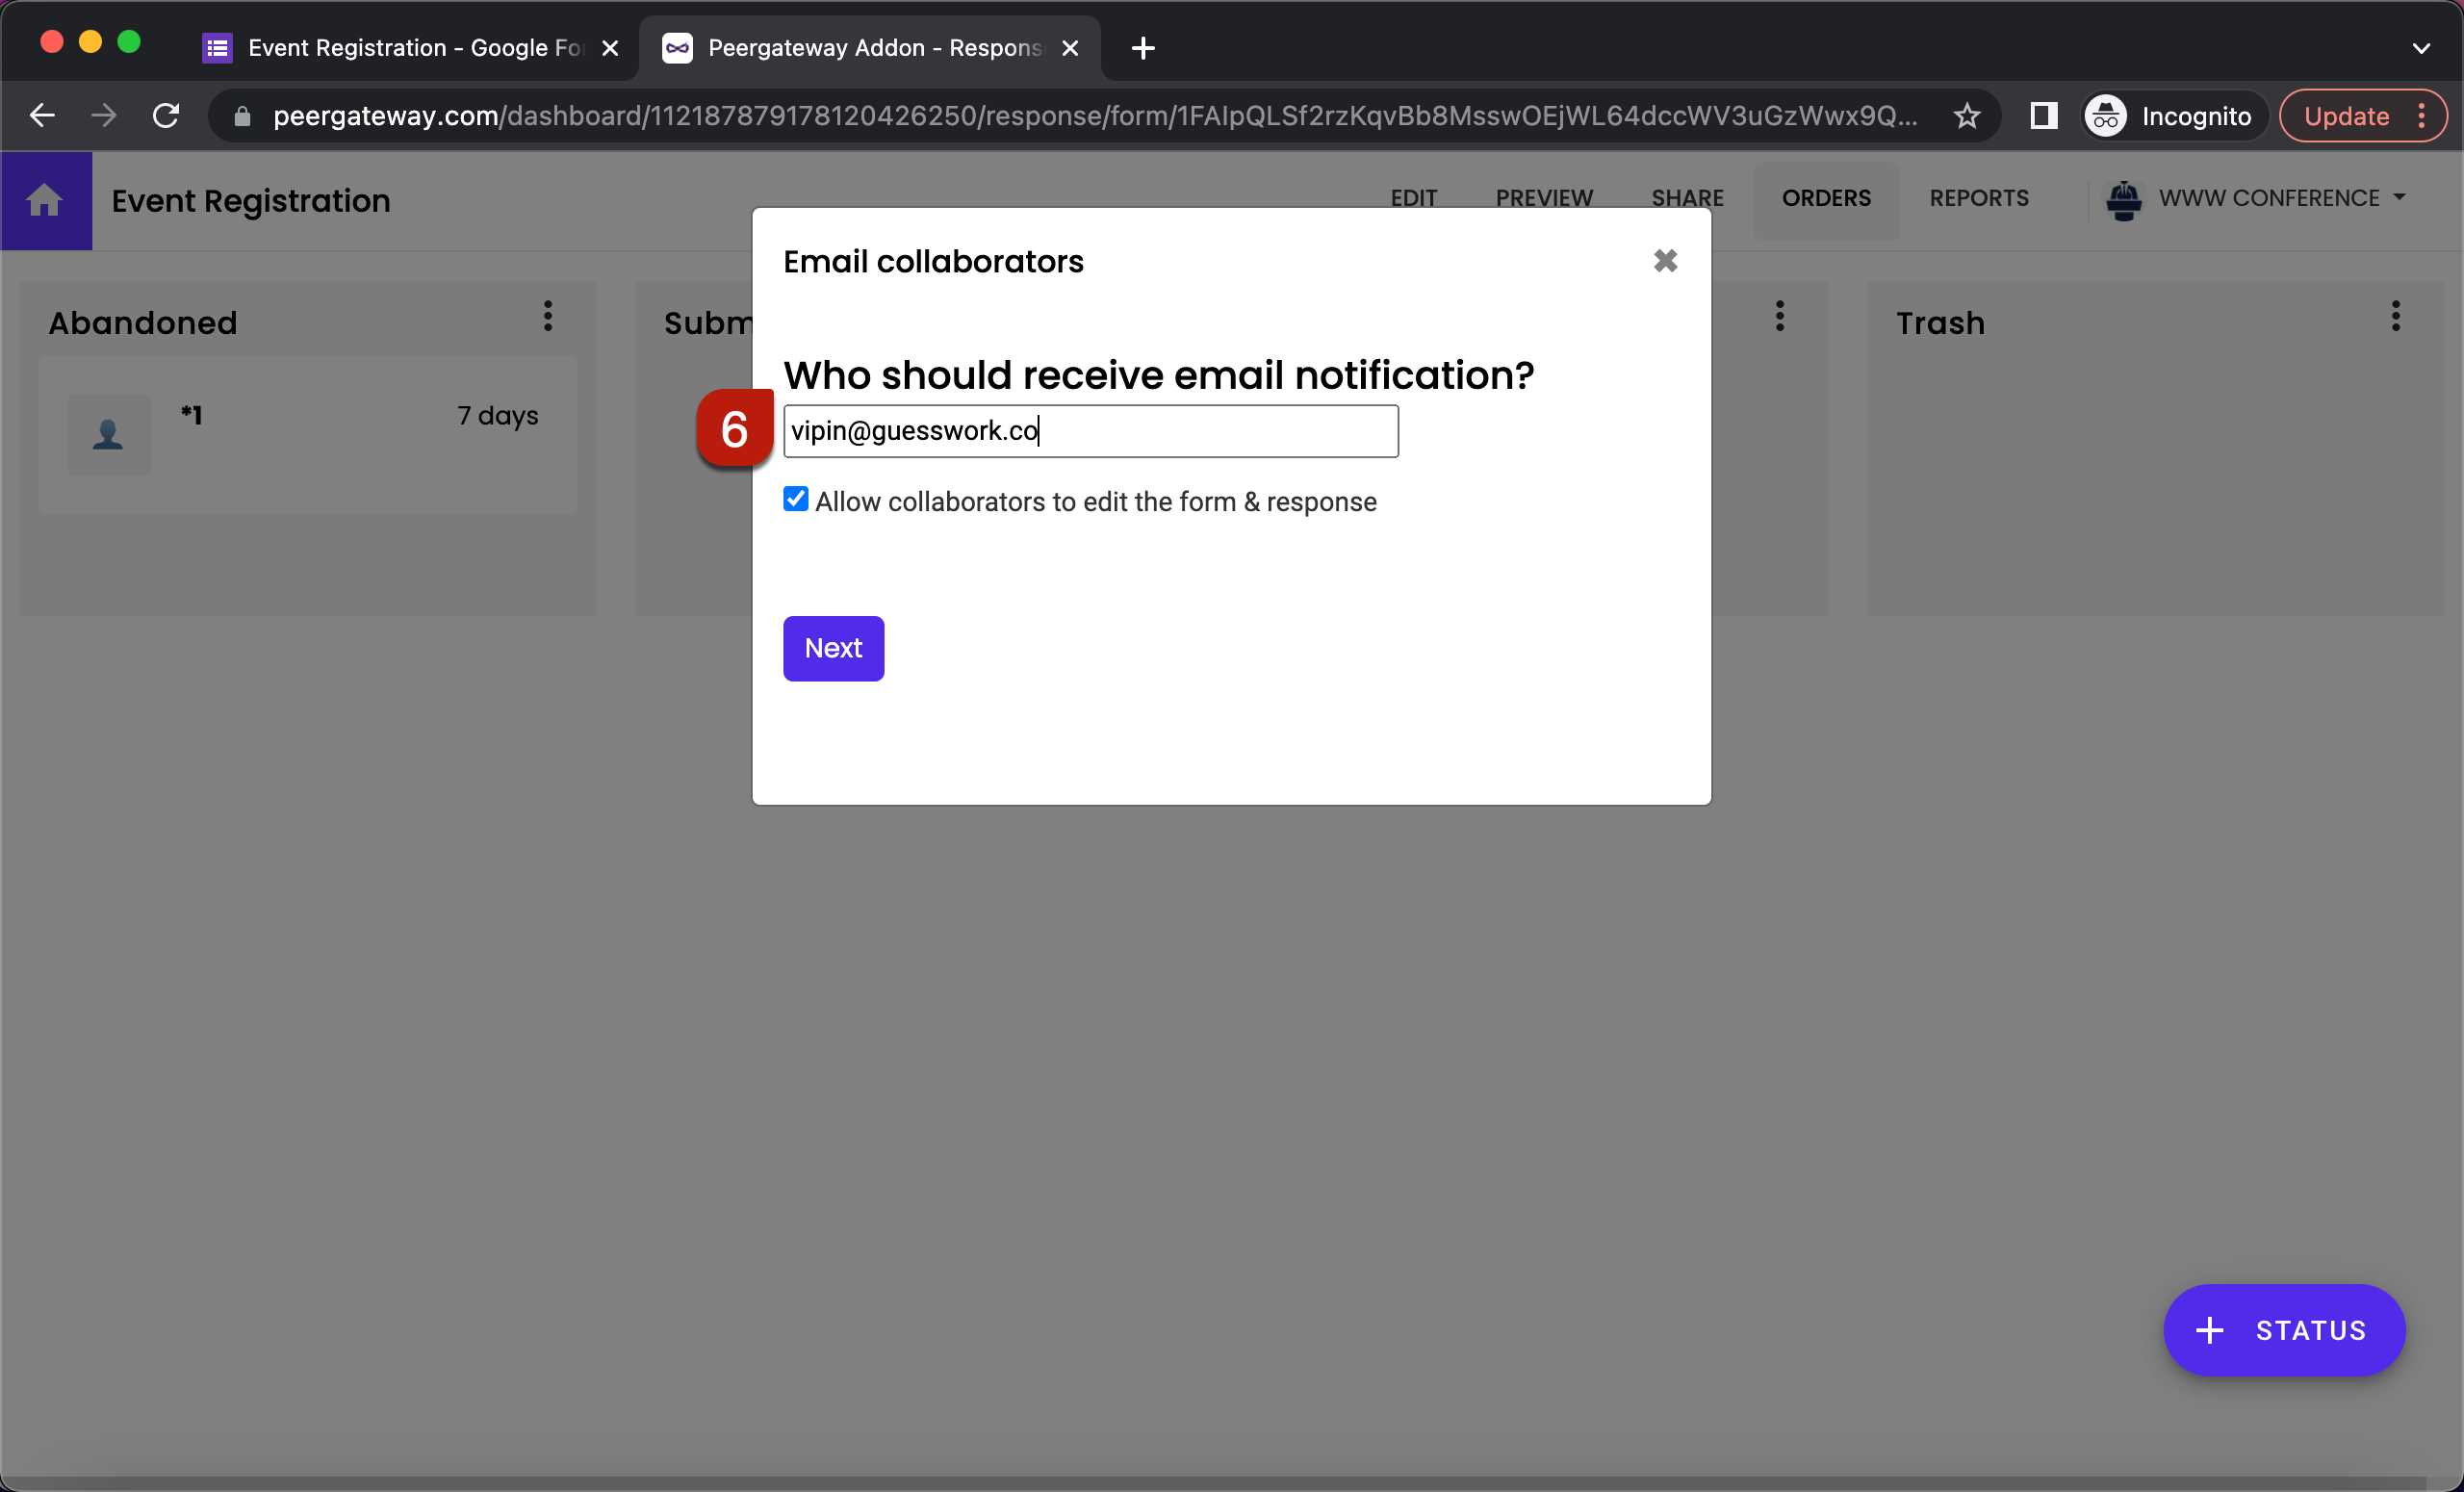 Step 6: Email notifications setup wizard will be displayed. Enter the email address and then click on the Next button. To notify multiple users, you can enter a list of email addresses or an email group separated by commas.